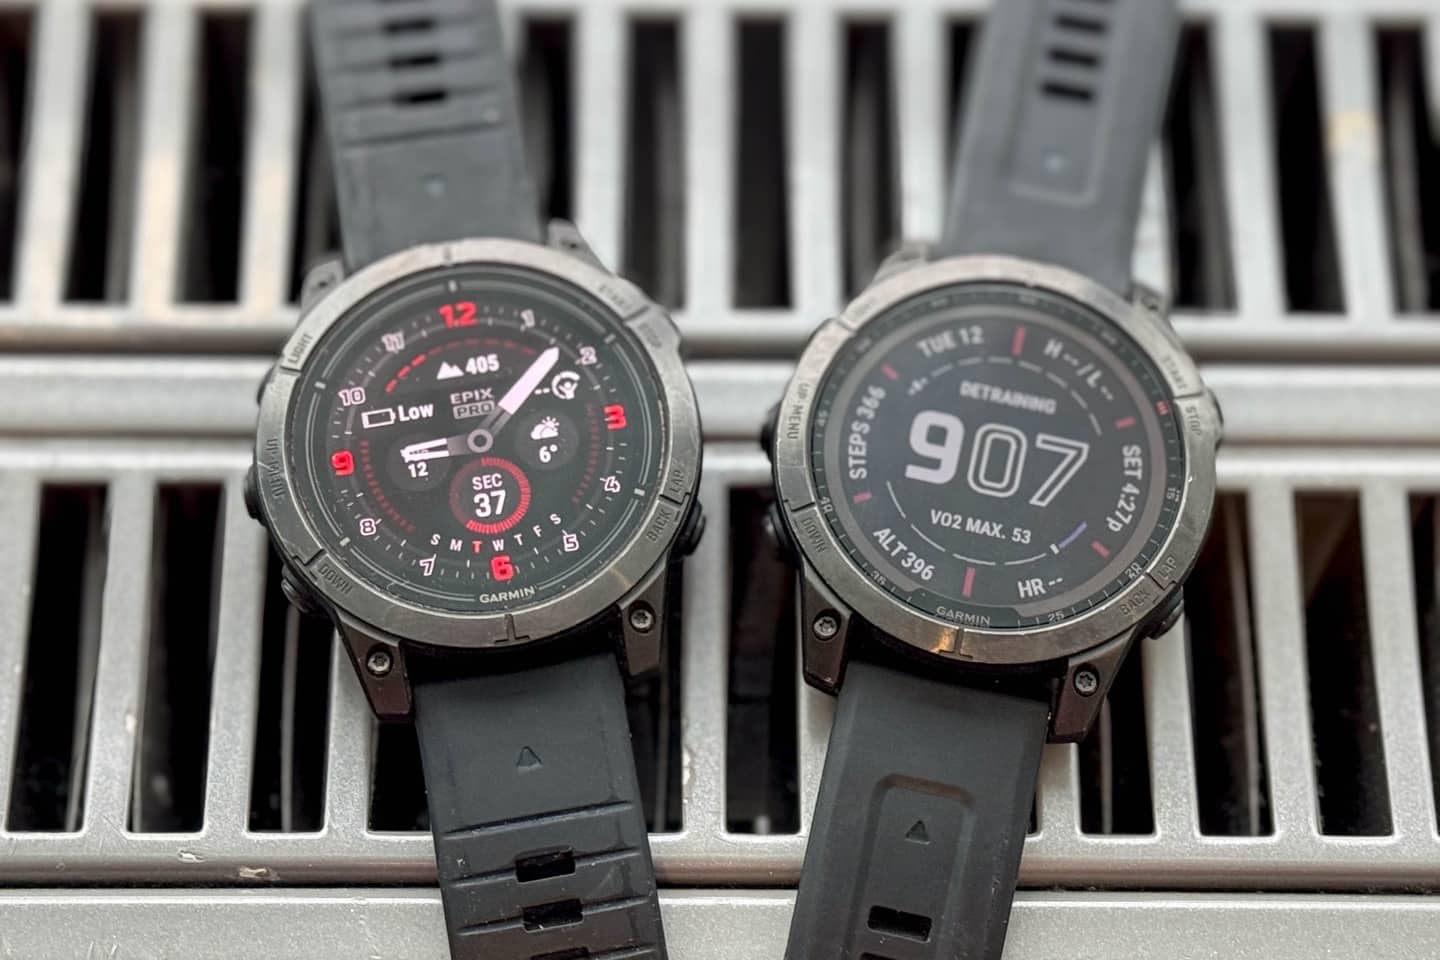 Garmin has just resurrected a four-year-old watch, and it could be